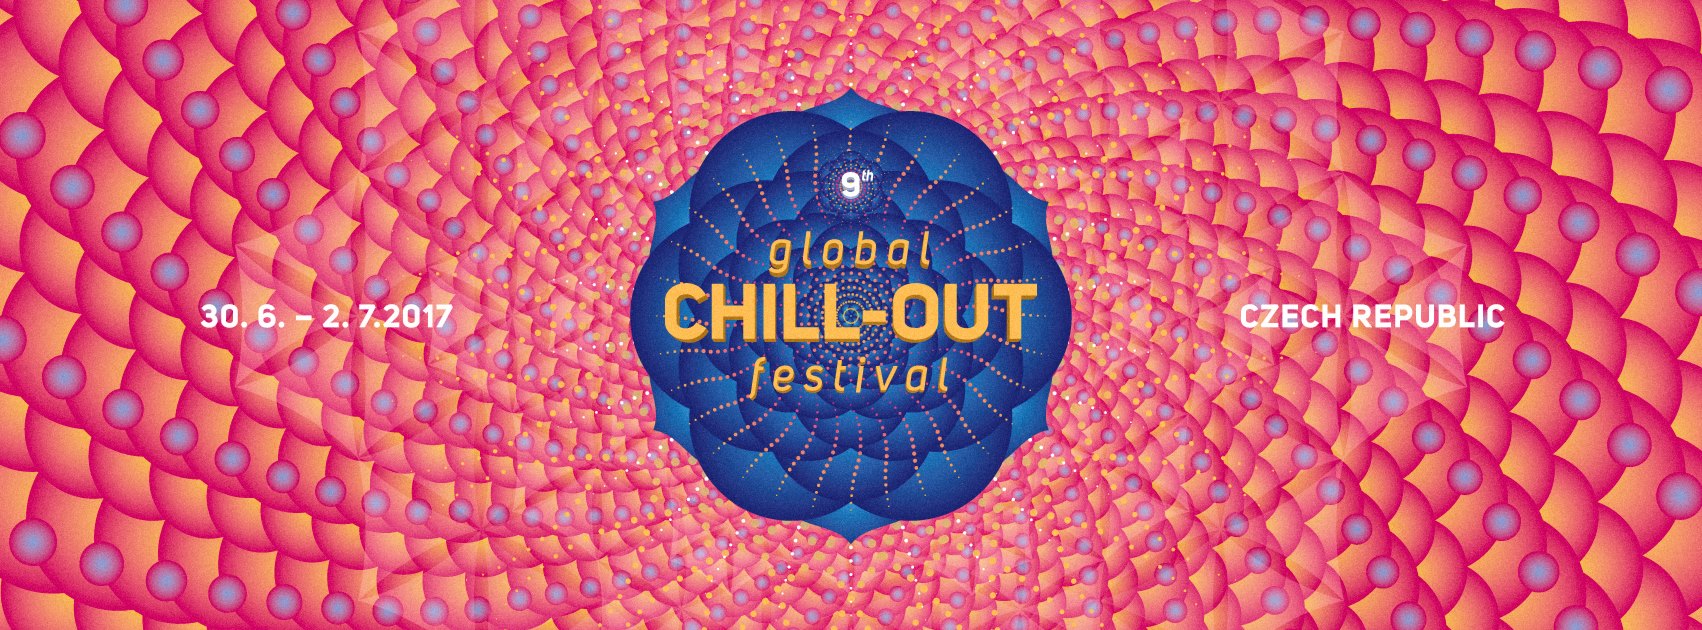 Shivanam I-One Live - Global Chill-Out festival no. 9